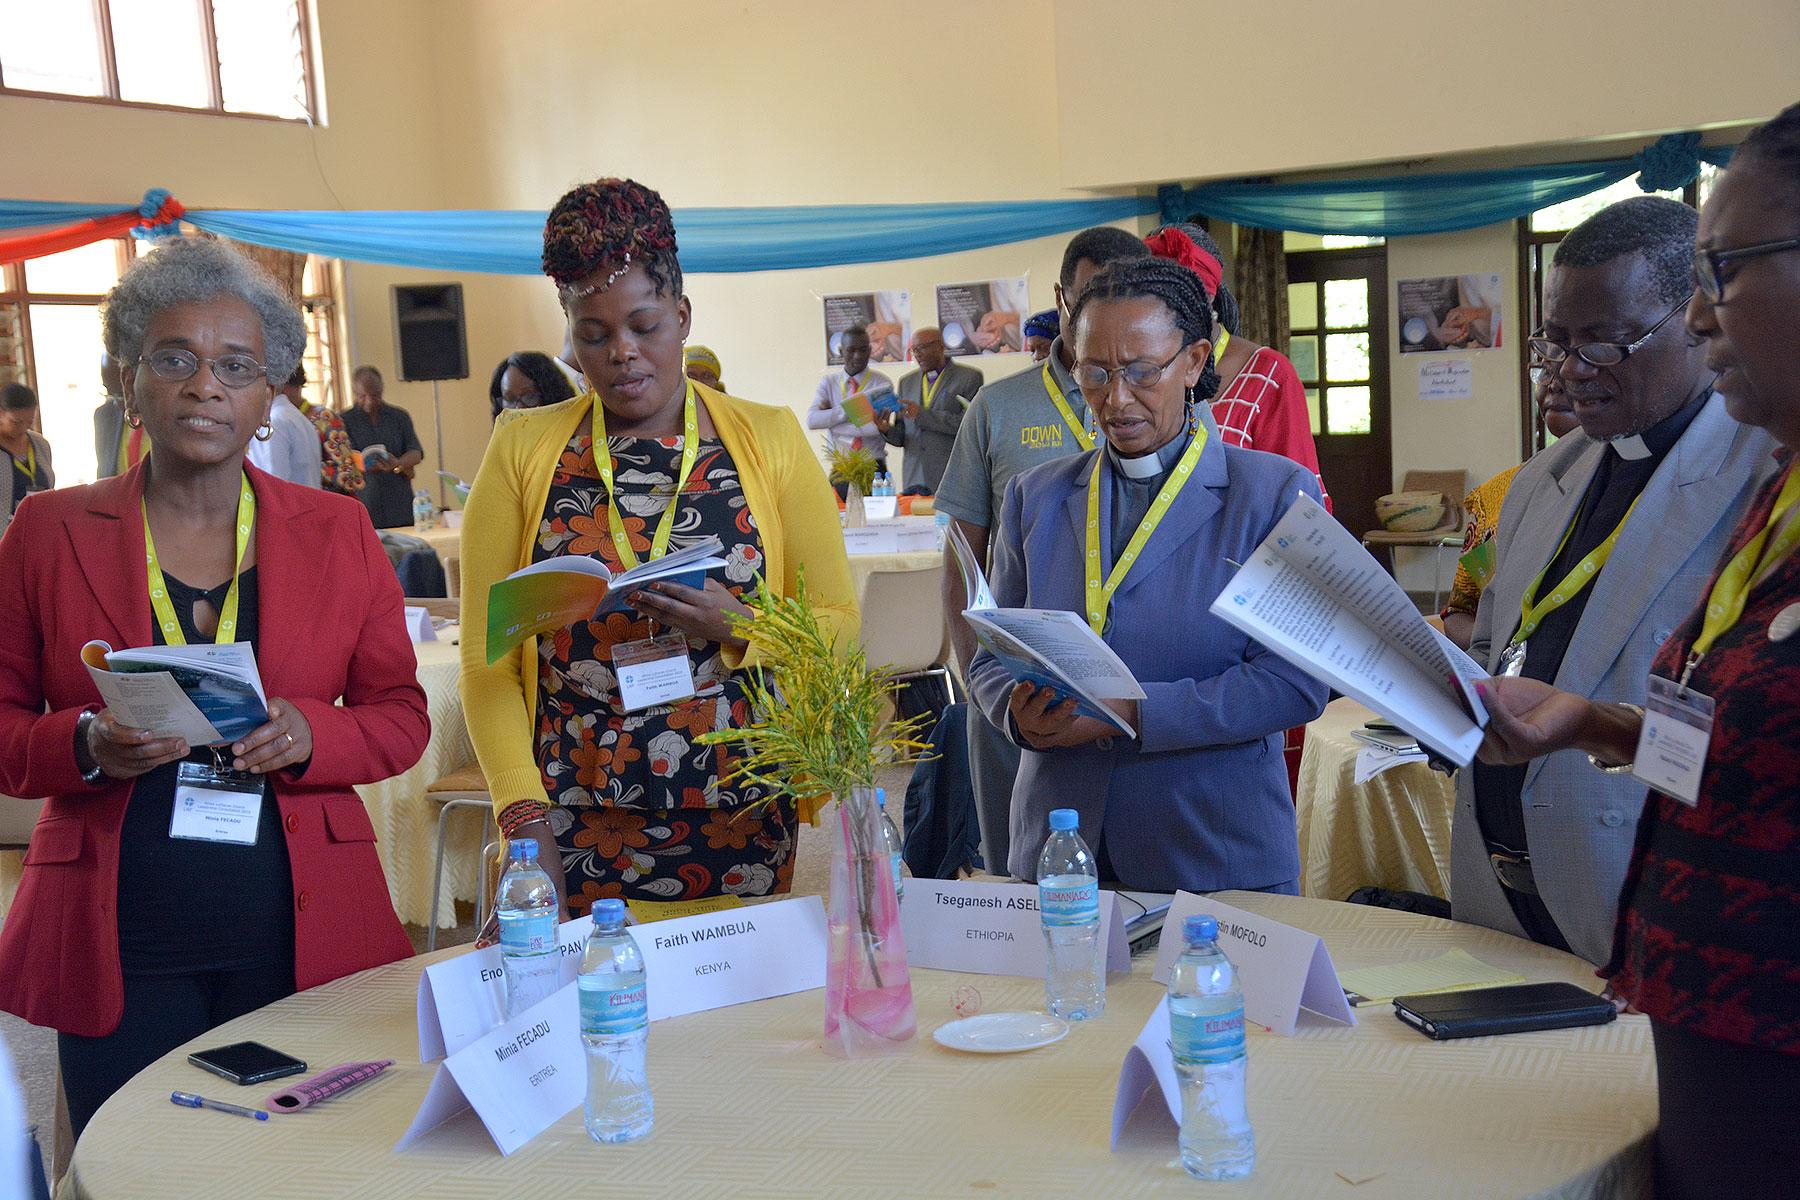 Delegates during the ALCLC, From left: Ms Minia Fecadu, Evangelical Lutheran Church of Eritrea; Ms Faith Wambua, Kenya Evangelical Lutheran Church; Rev. Seganesh Ayele Asele, The Ethiopian Evangelical Church Mekane Yesus, Rev. Justin Mofolo and Ms Mabel Madinga, Evangelical Lutheran Church in Malawi.